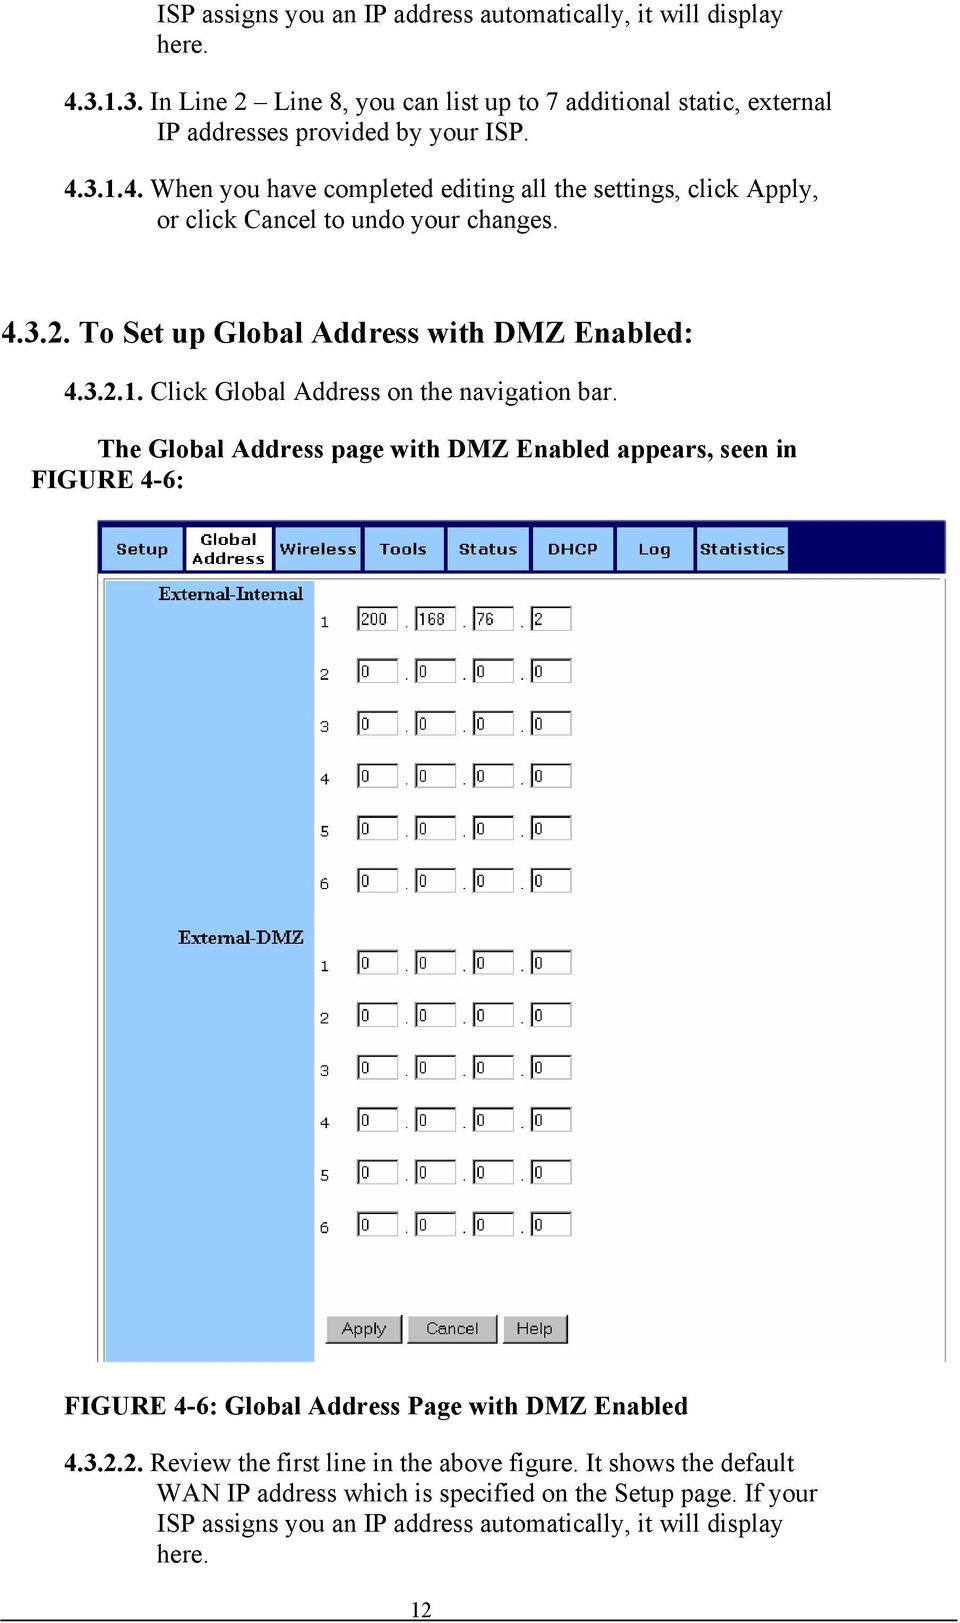 The Global Address page with DMZ Enabled appears, seen in FIGURE 4-6: FIGURE 4-6: Global Address Page with DMZ Enabled 4.3.2.2. Review the first line in the above figure.